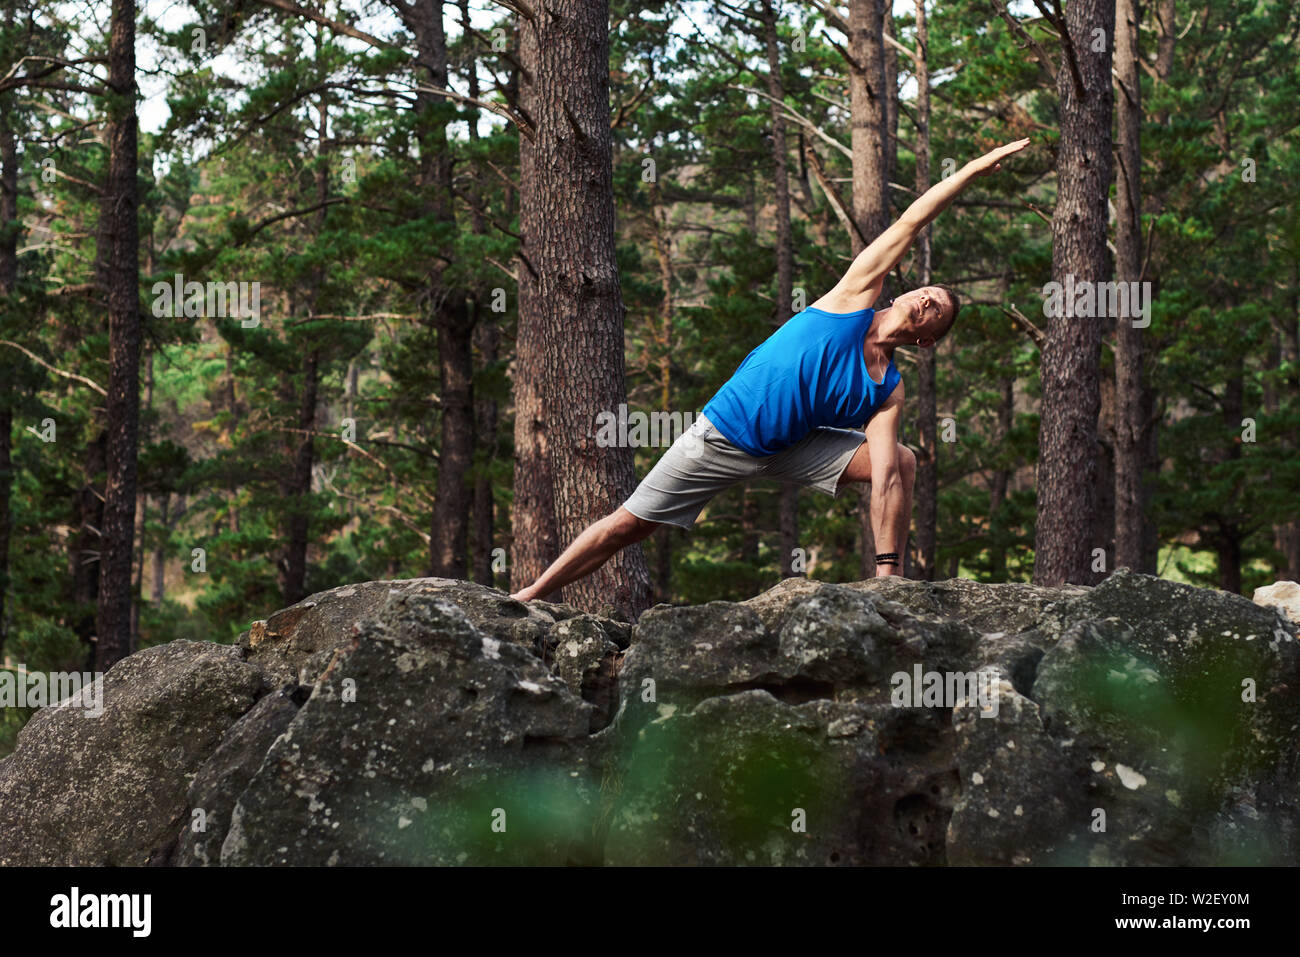 Man doing the extending side angle pose in a forest Stock Photo